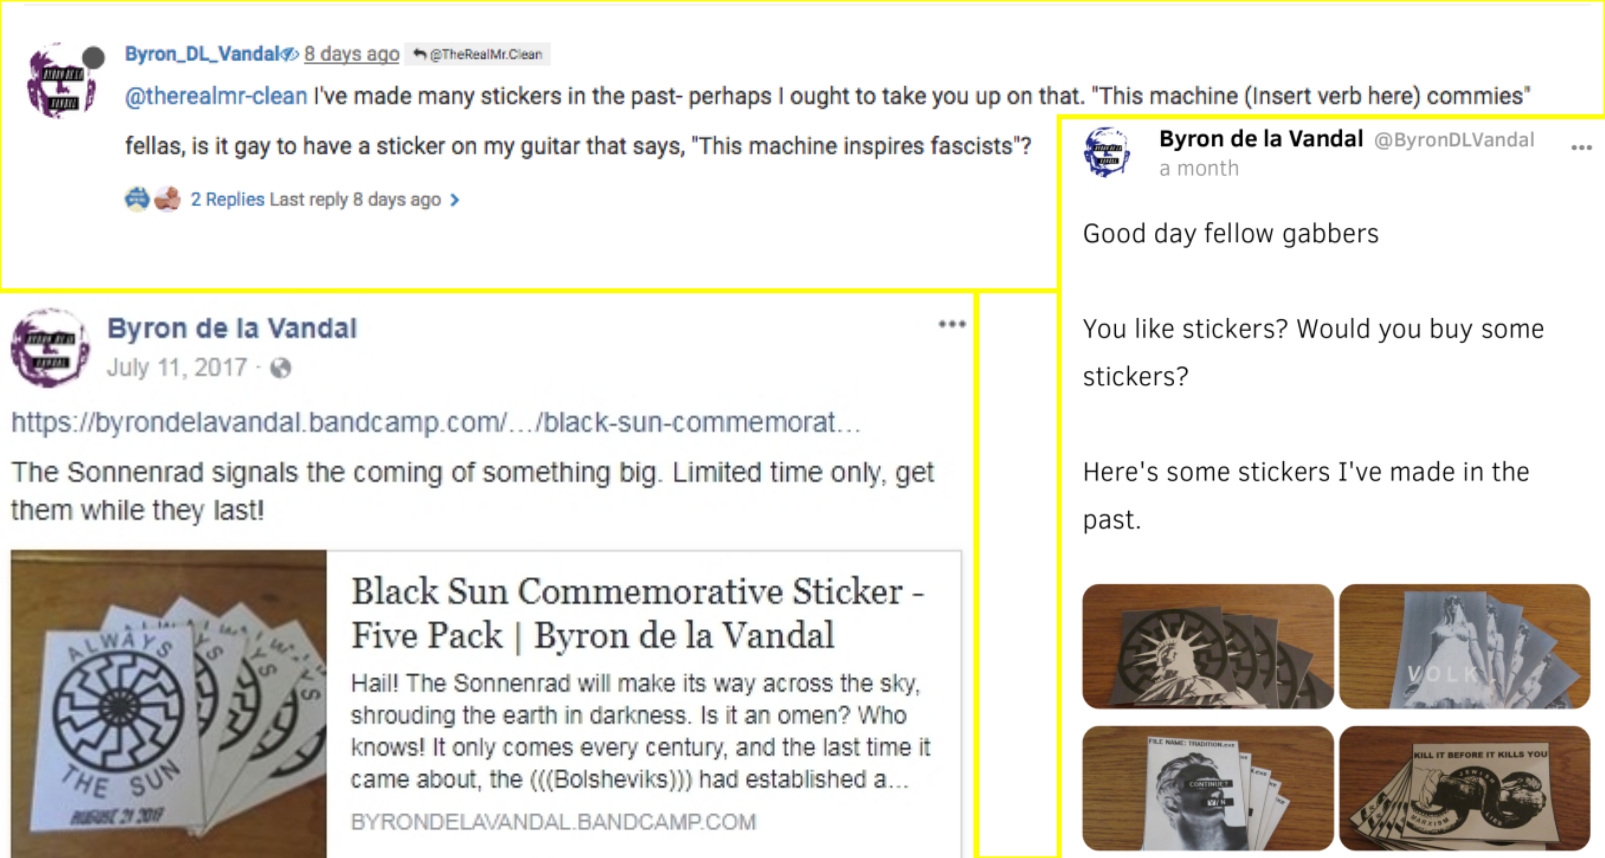 Byron de la Vandal offers to sell stickers over the internet